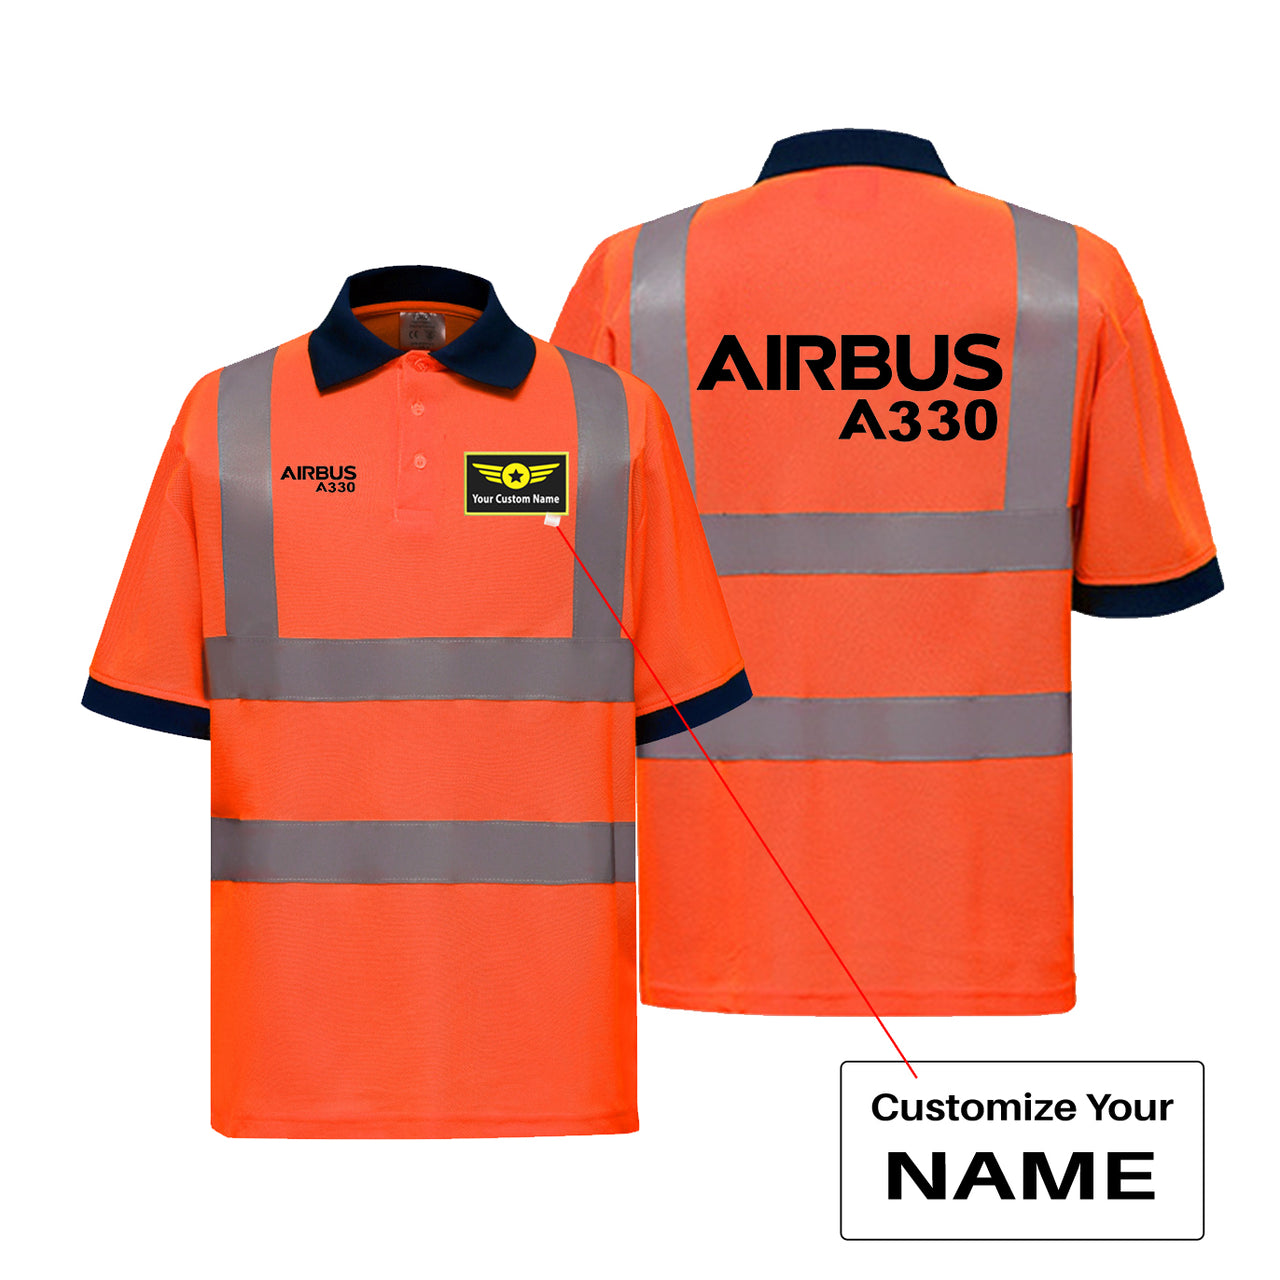 Airbus A330 & Text Designed Reflective Polo T-Shirts